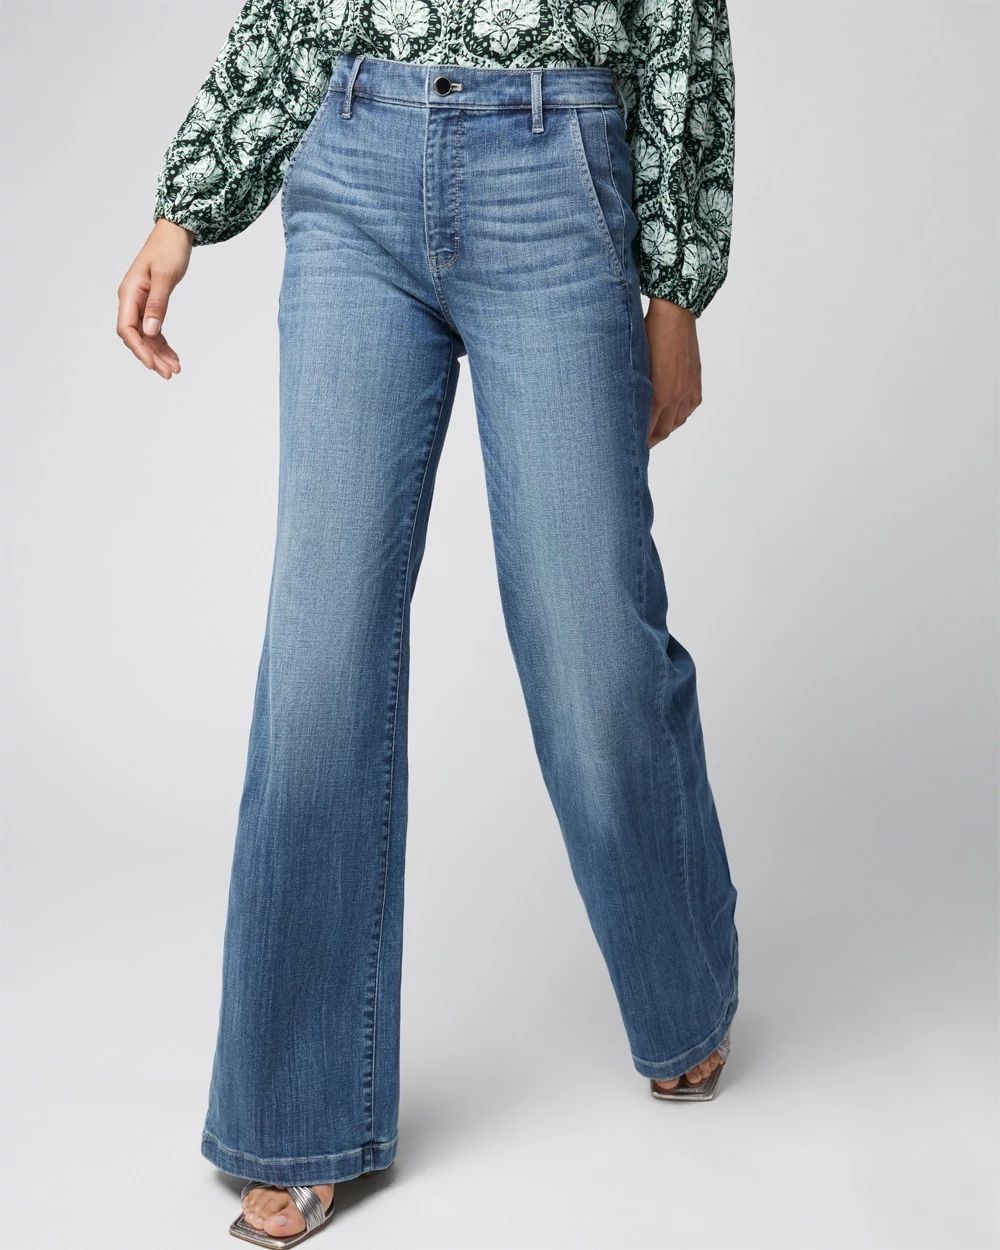 Petite Extra High-Rise Everyday Soft Denim  Wide Leg Jeans click to view larger image.